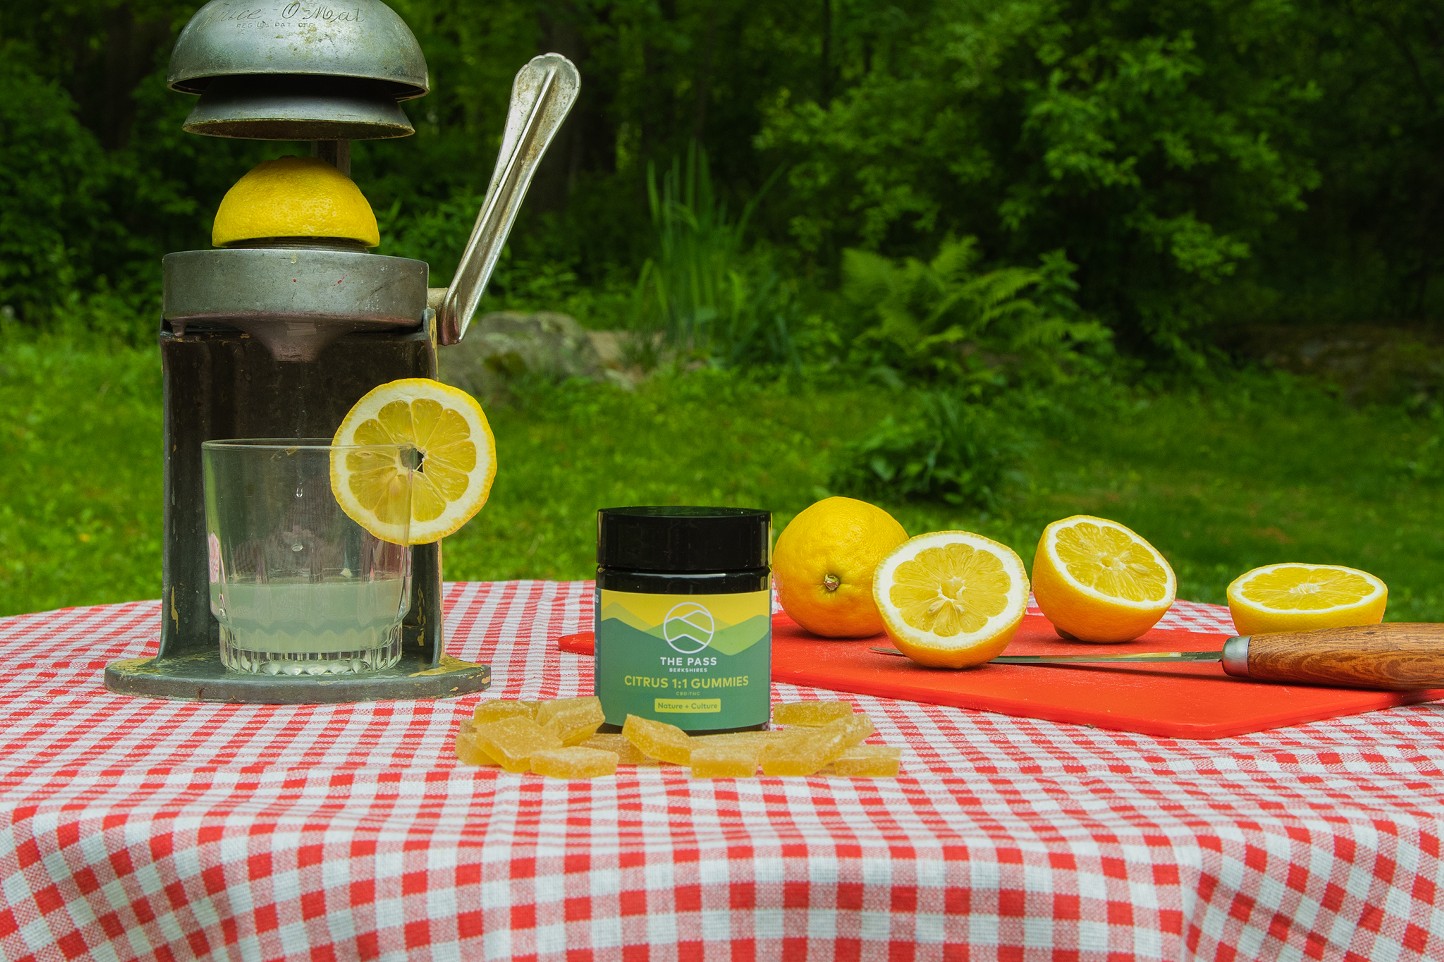 A Little Slice of Sunshine: New Citrus 1:1 Gummies from The Pass | Sponsored | Product Reviews | Hudson Valley